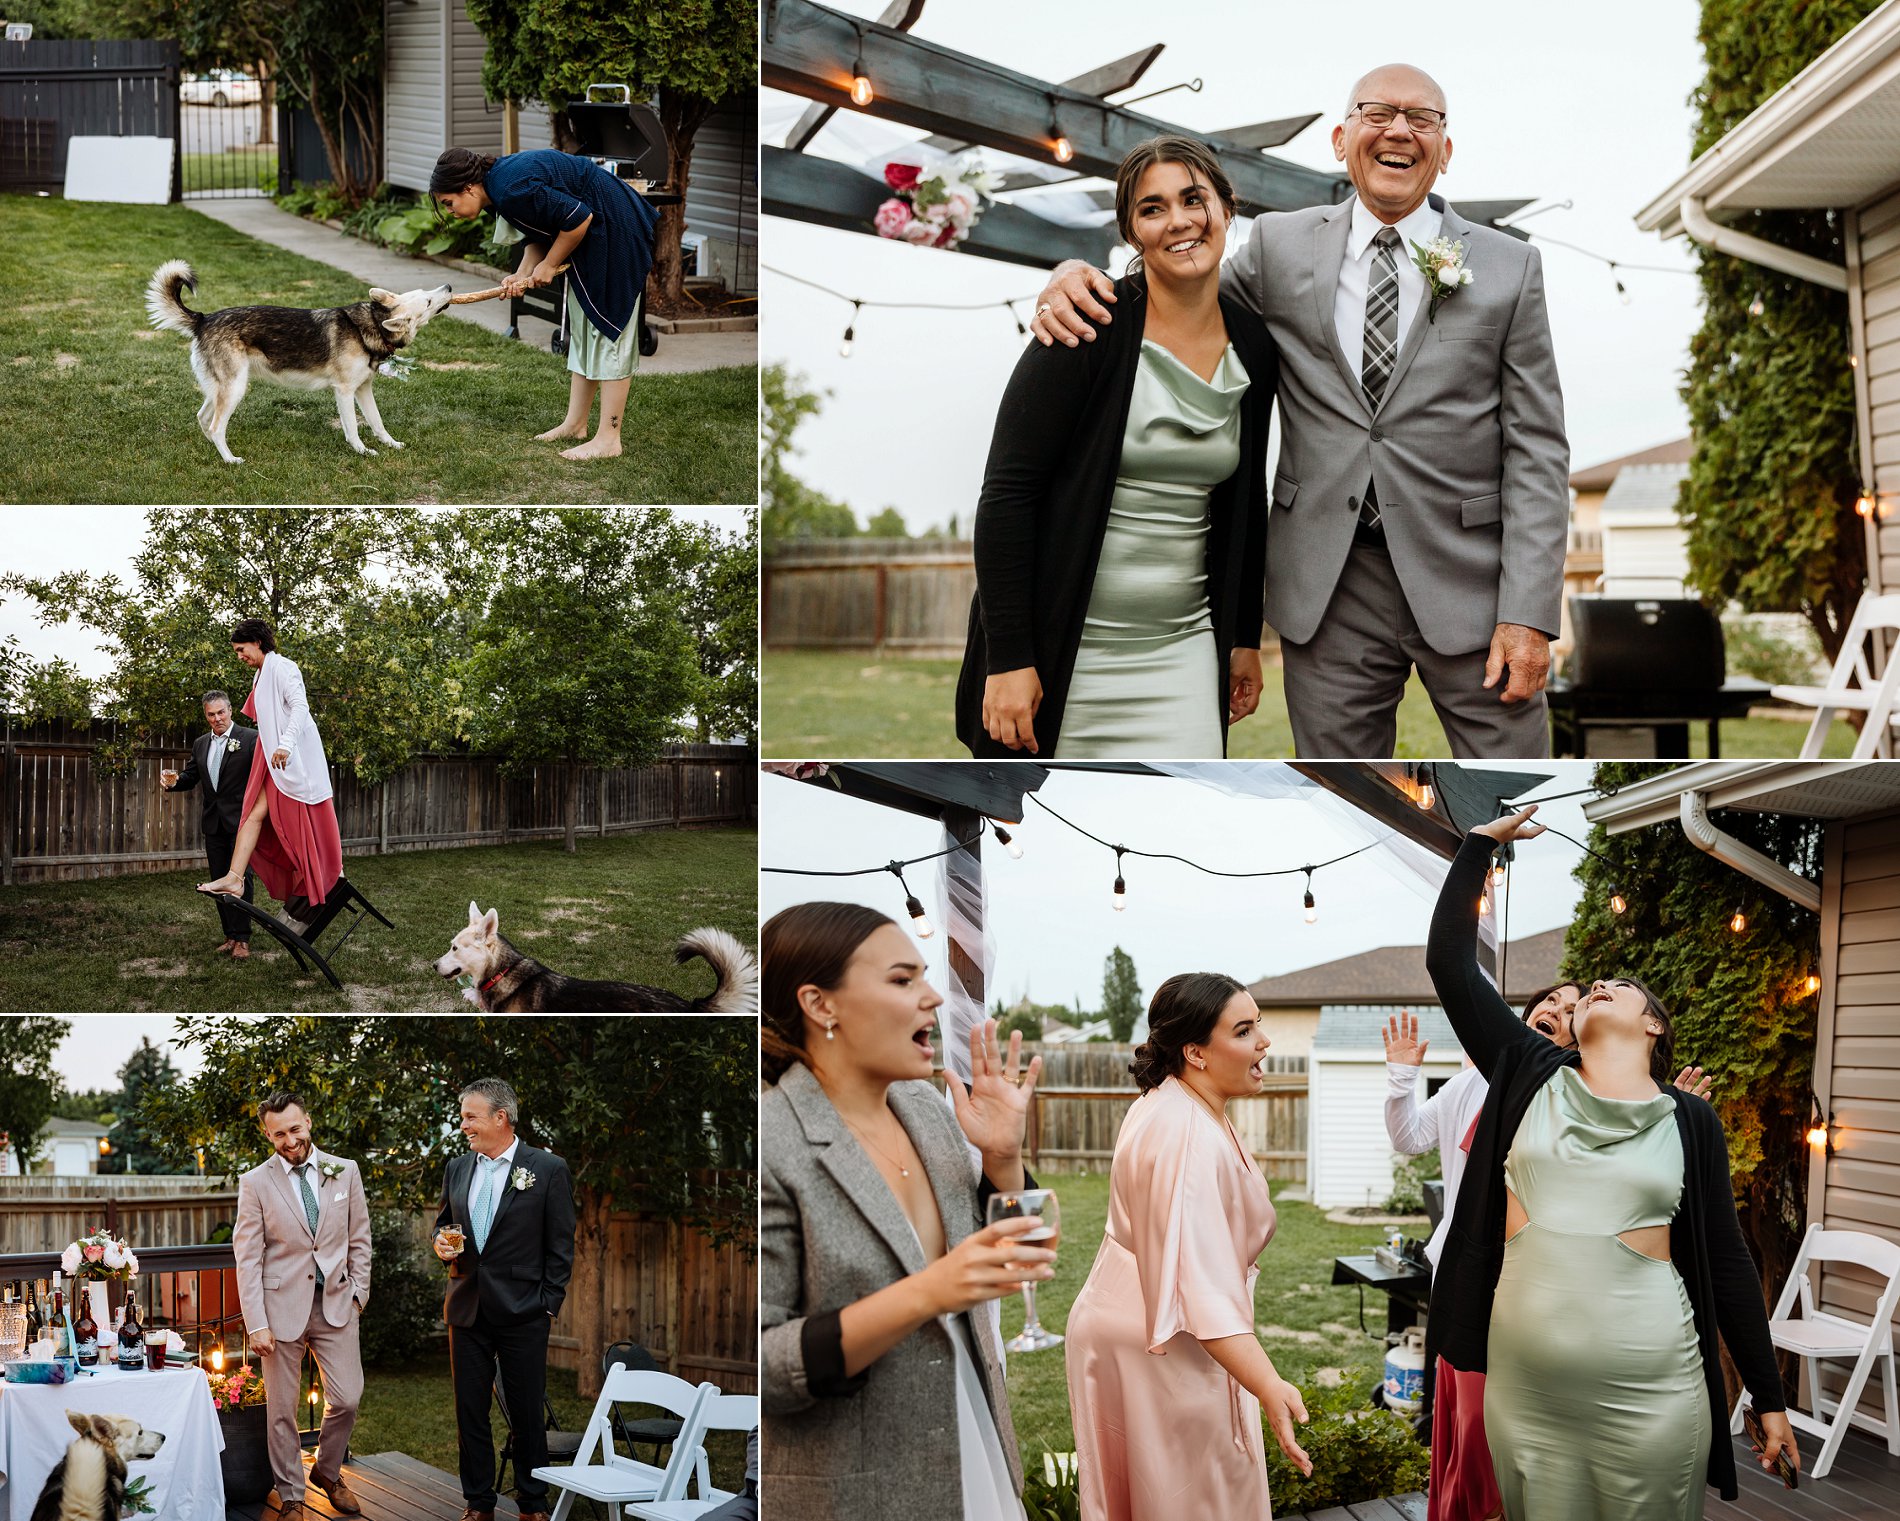 The back deck became the a dance floor at this outdoor Saskatoon wedding.